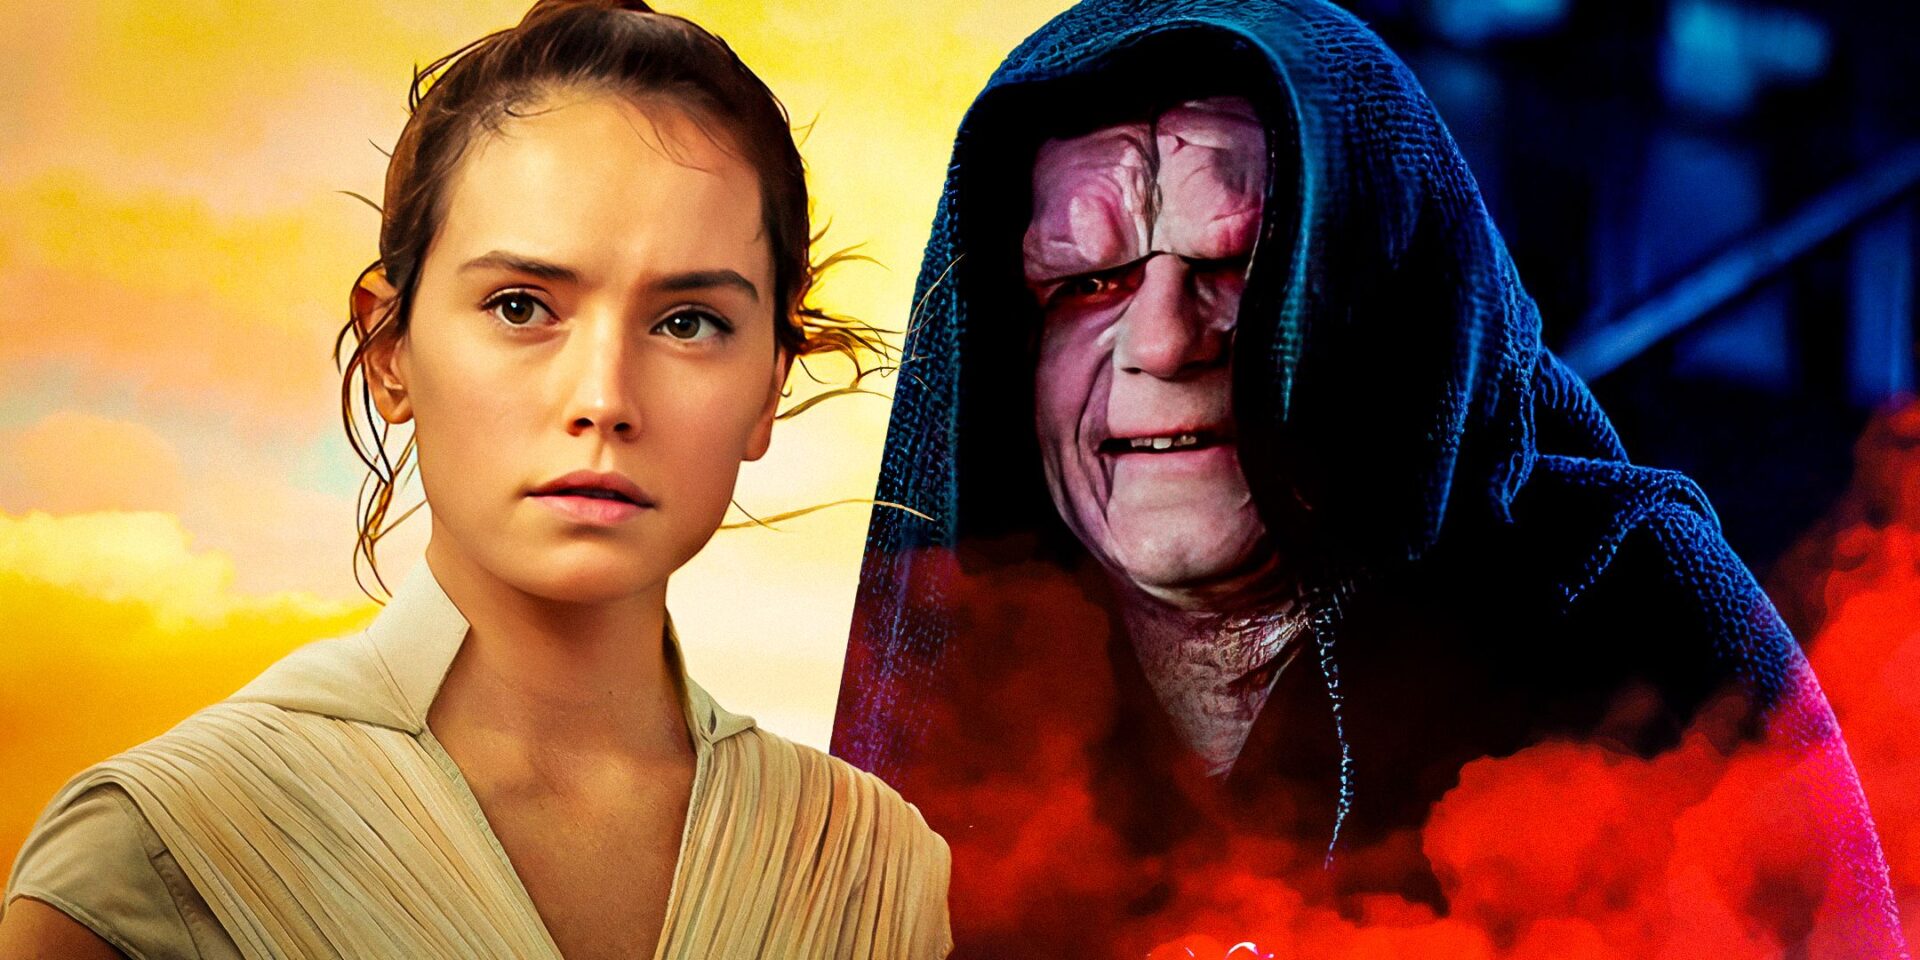 10 Wildest Star Wars Controversies Since Disney Bought The Franchise